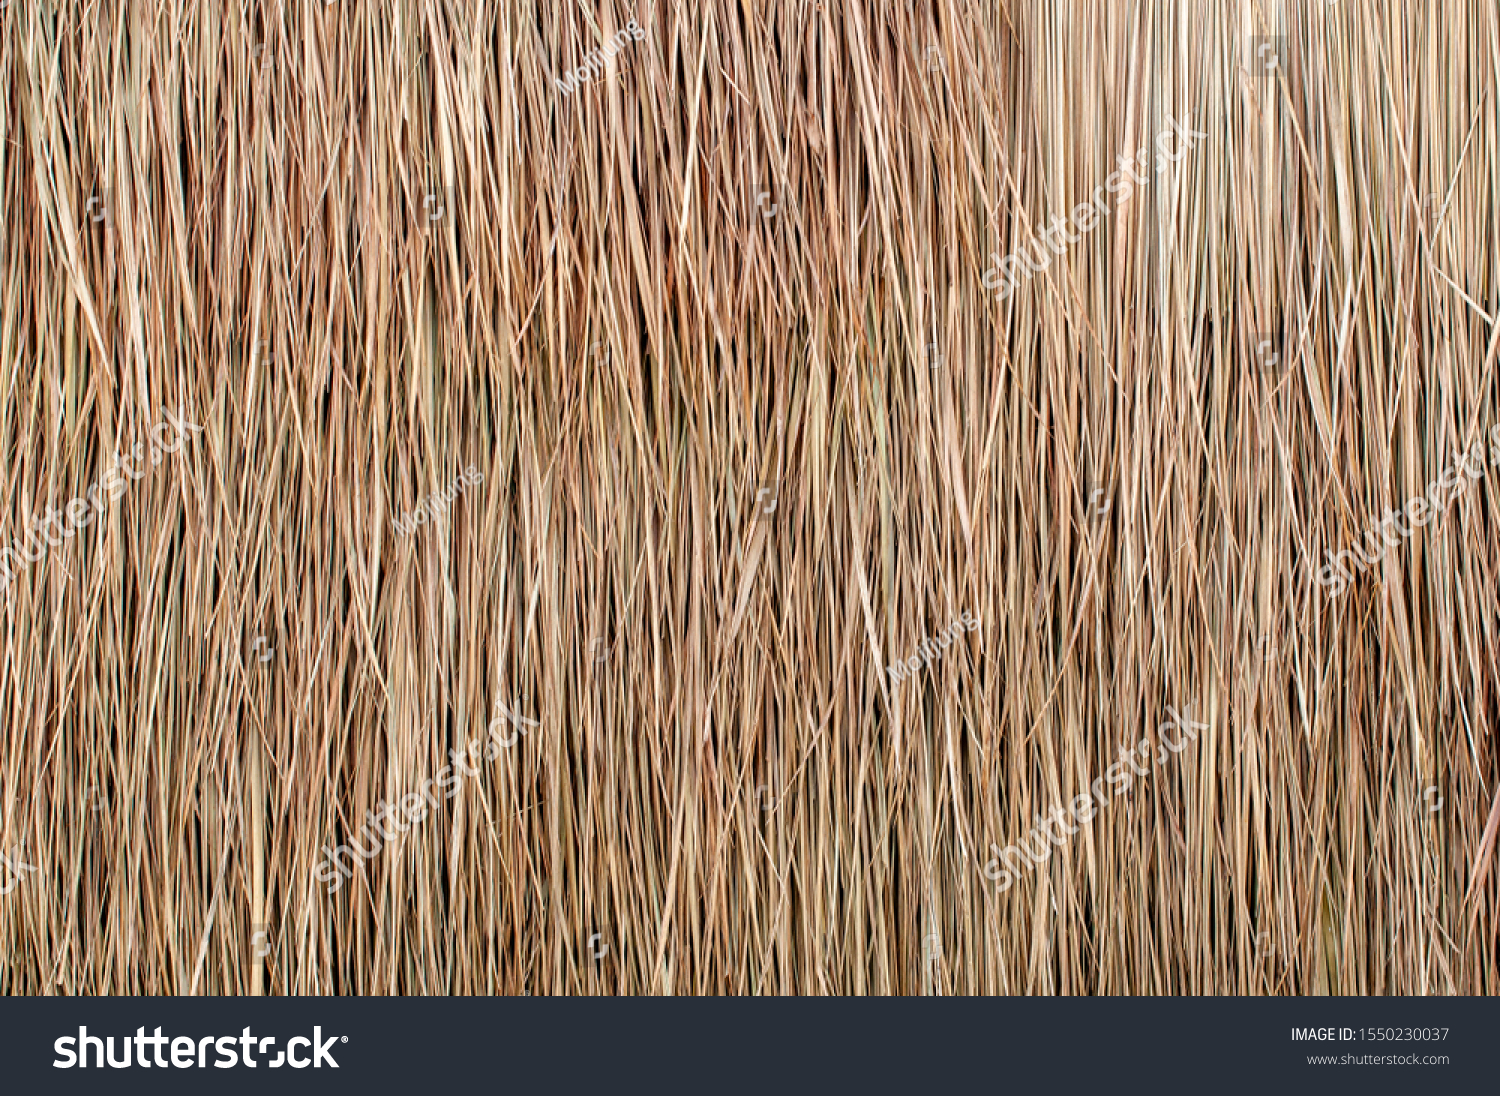 Close up of thatch roof background, hay or dry grass background #1550230037